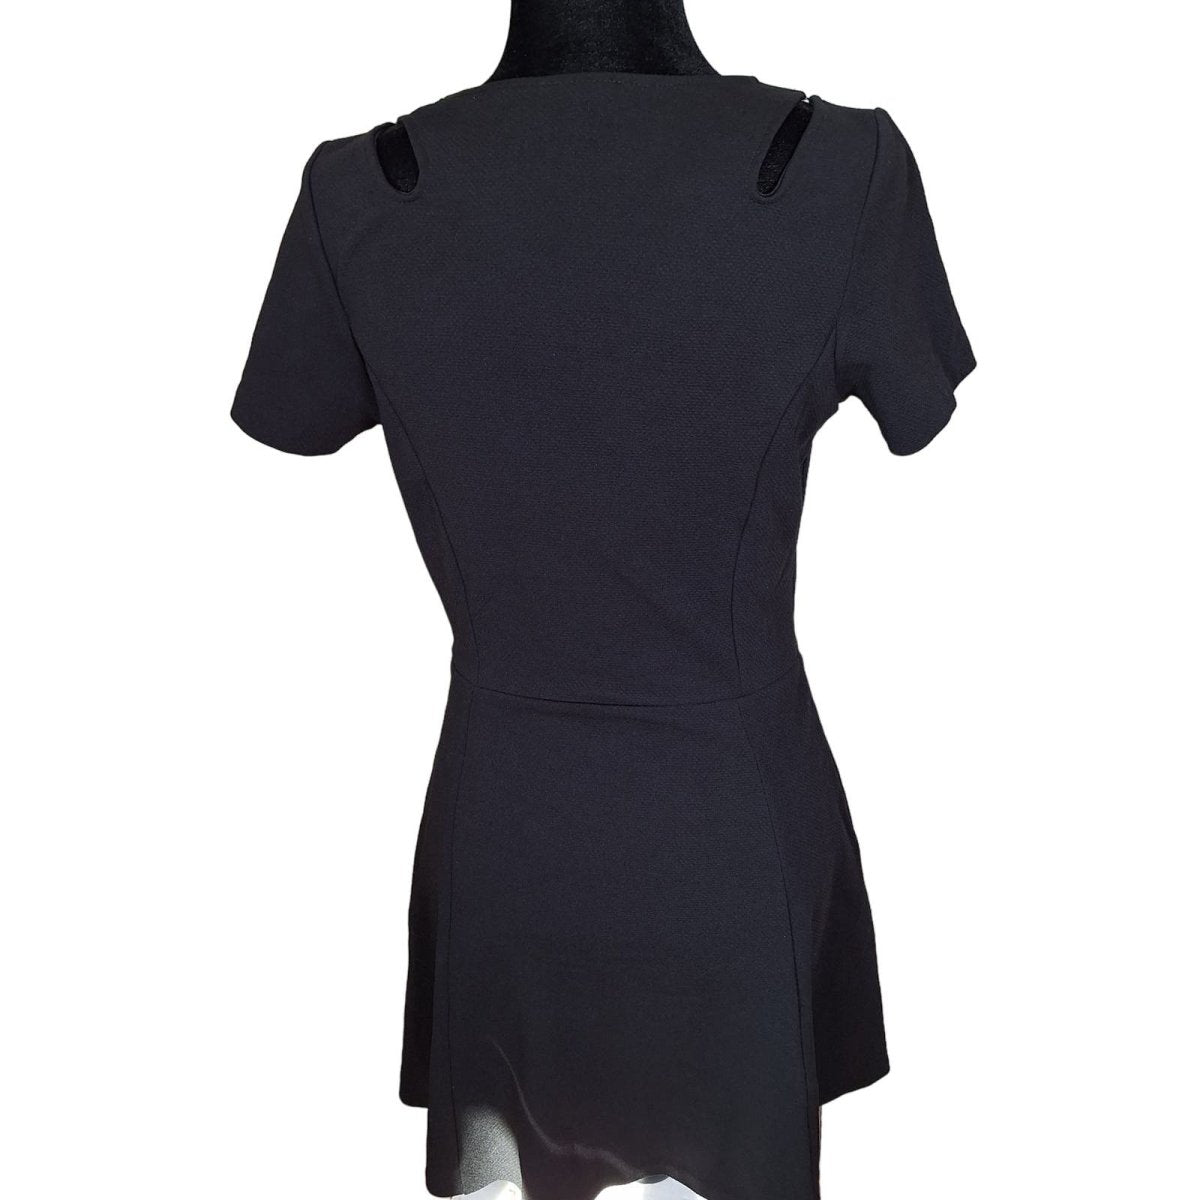 Y2K Black Fit and Flare Mini Dress w/Cutouts Women Size M/L - themallvintage The Mall Vintage